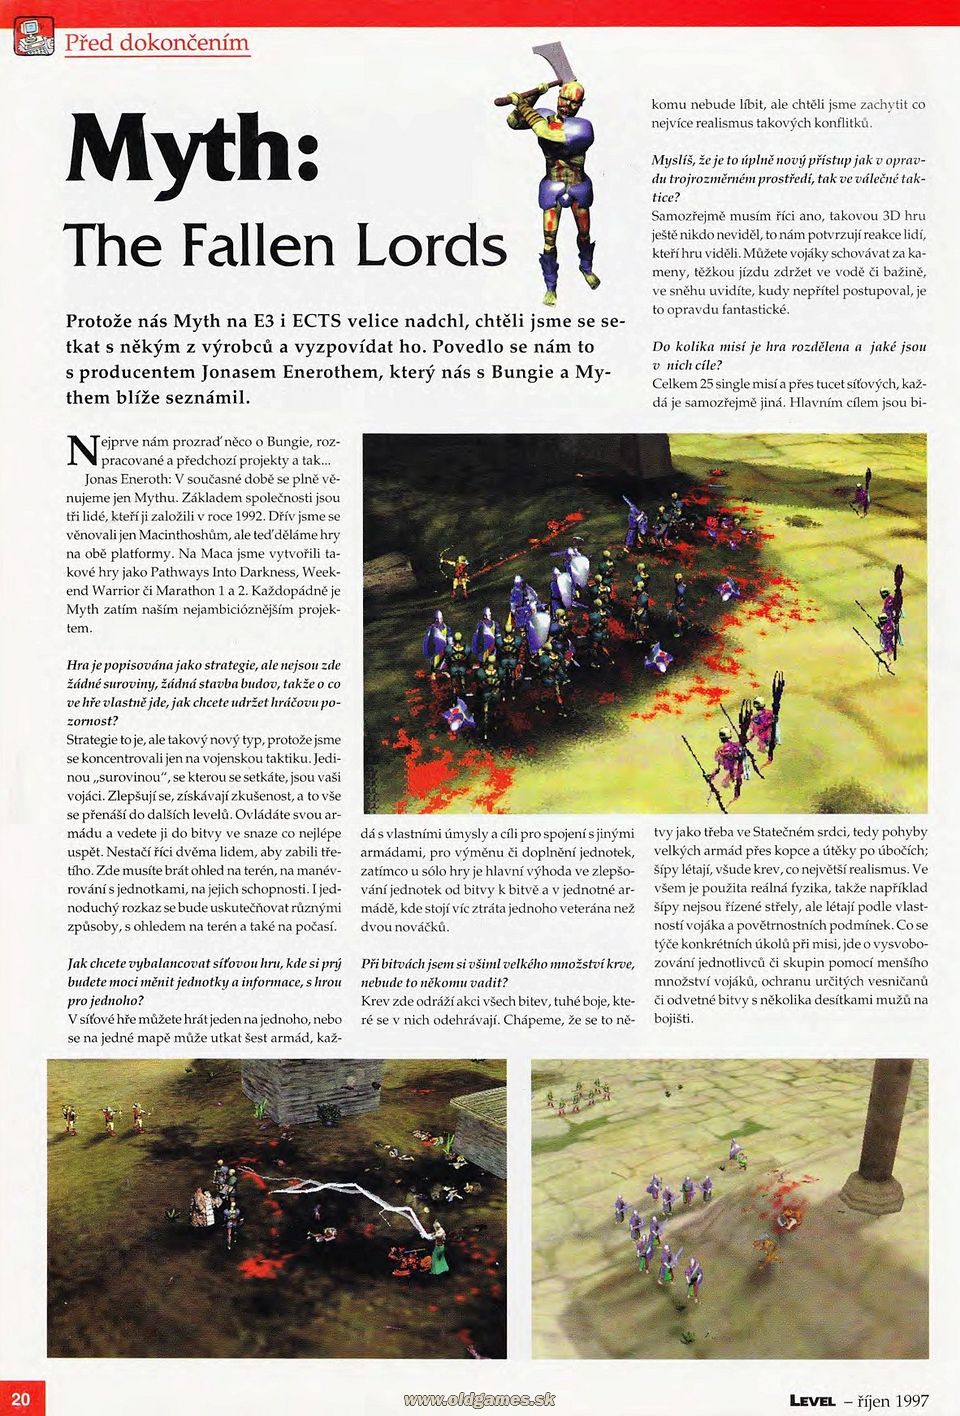 Preview: Myth - The Fallen Lords